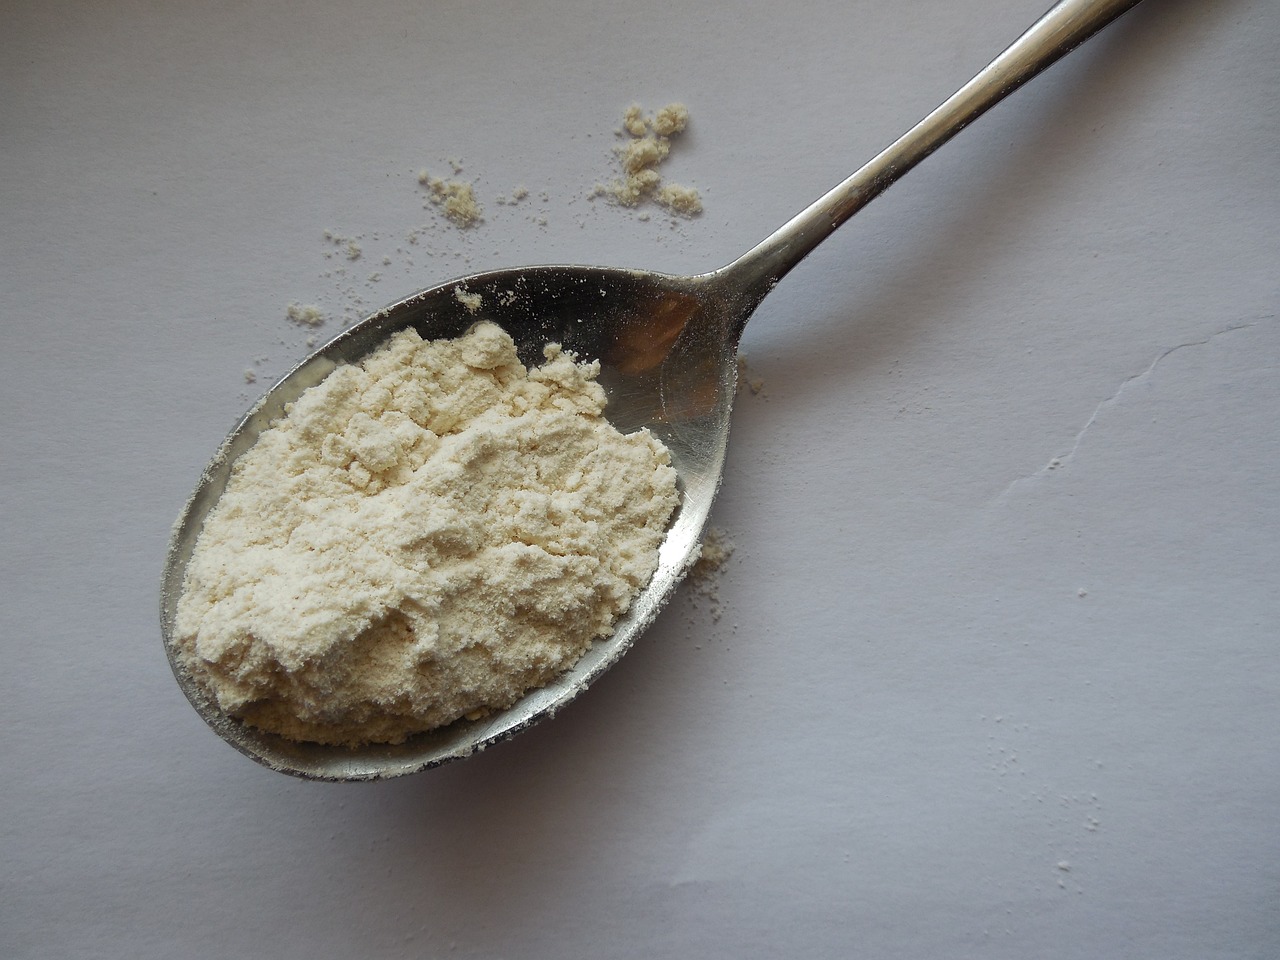 Bentonite Clay Food Grade: A Natural Solution for Better Health